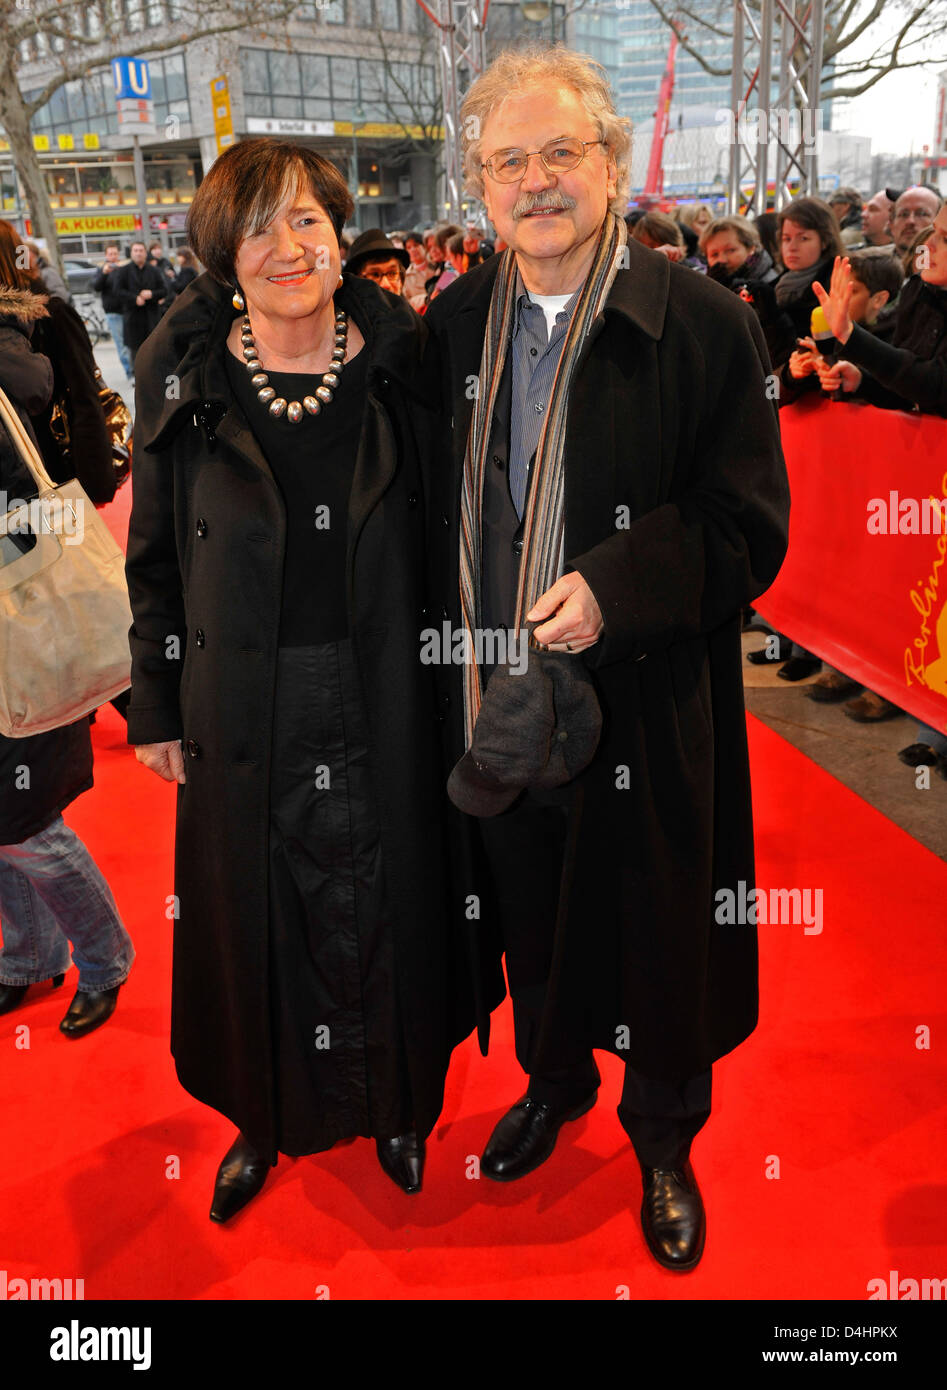 German writer Paul Maar and his wife Nele arrive for the premiere of their film ?Lippel?s Dream? at the 59th Berlin International Film Festival in Berlin, Germany, 06 February 2009. The film runs in the Generation section of the Berlinale, a total of 18 films compete for the Silver and Golden Bears of the 59th Berlinale. Photo: Gero Breloer Stock Photo